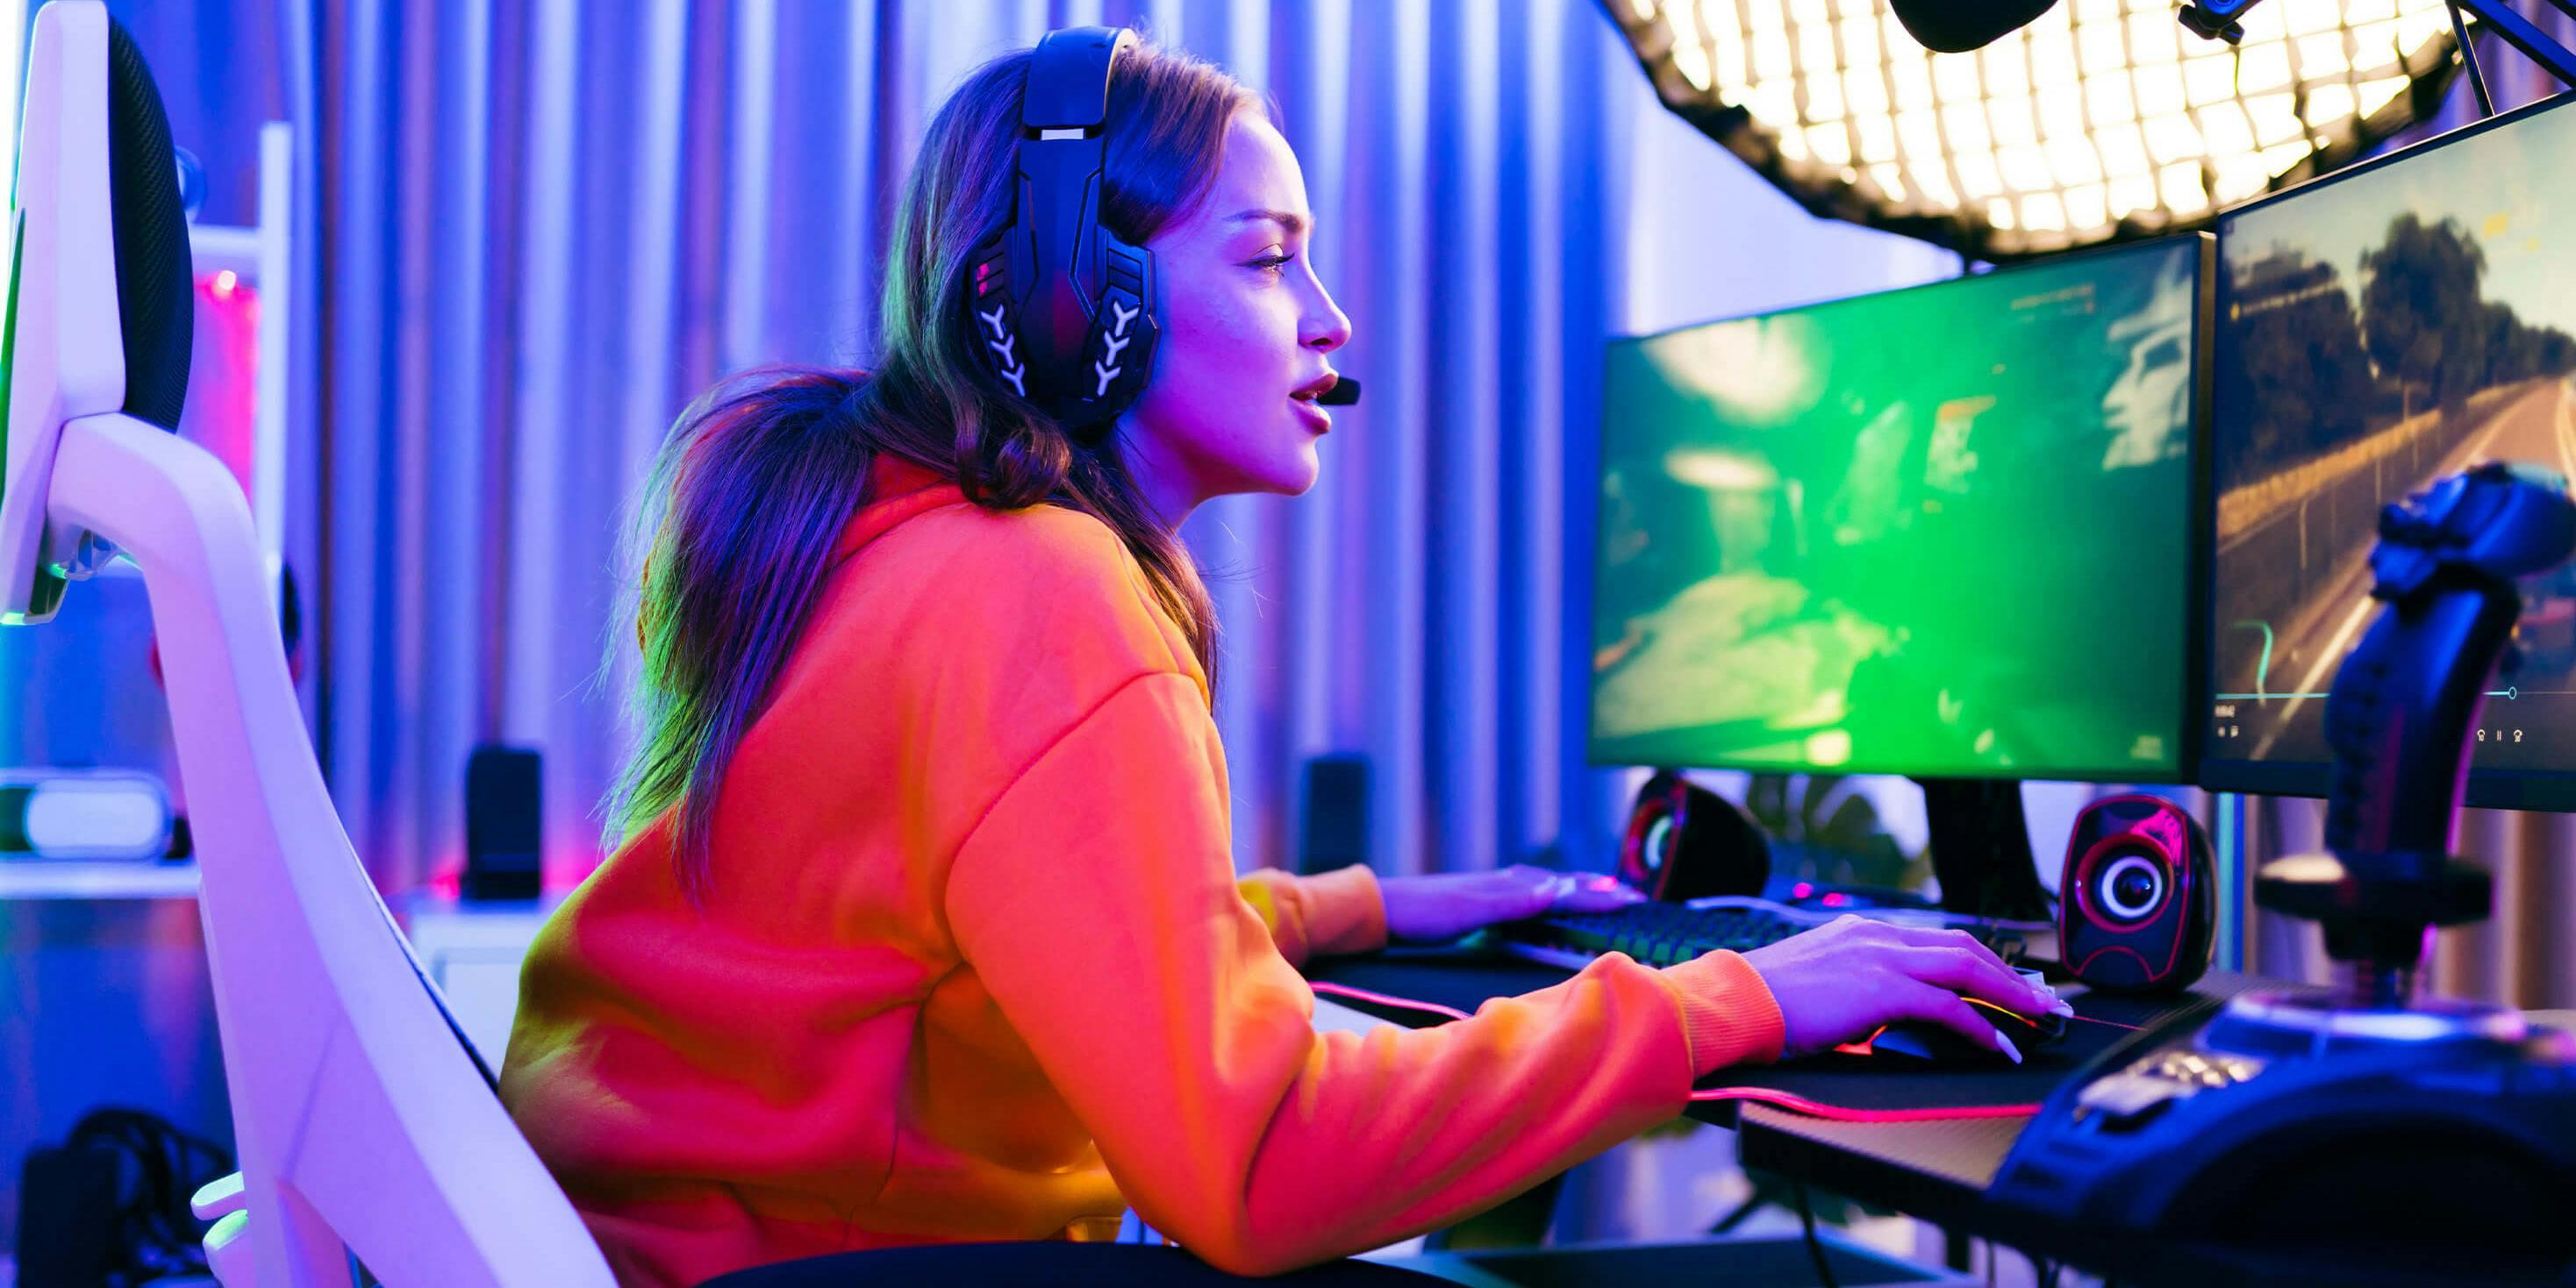 A person in a bright orange hoodie sits in a gaming chair and livestreams a video game to their viewers.